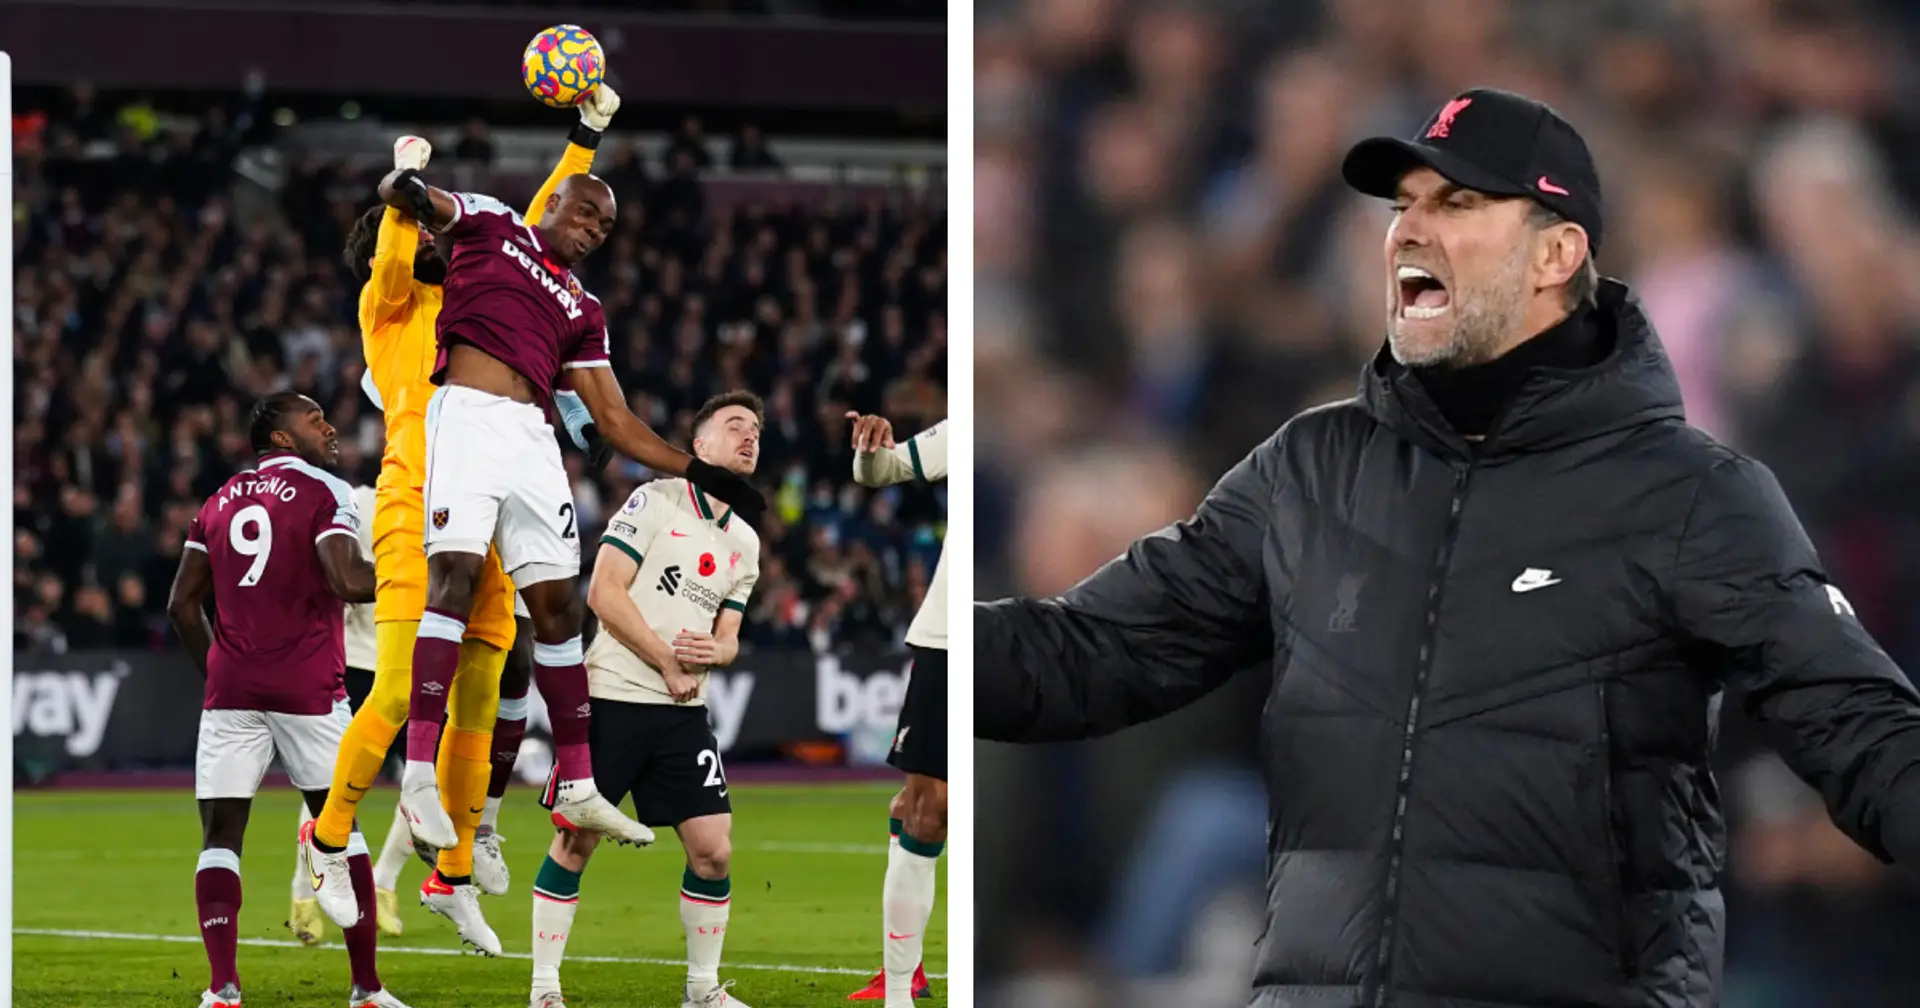 'I can't see how it's a foul': ex-Premier League referee disagrees with Klopp about Ogbonna–Alisson incident